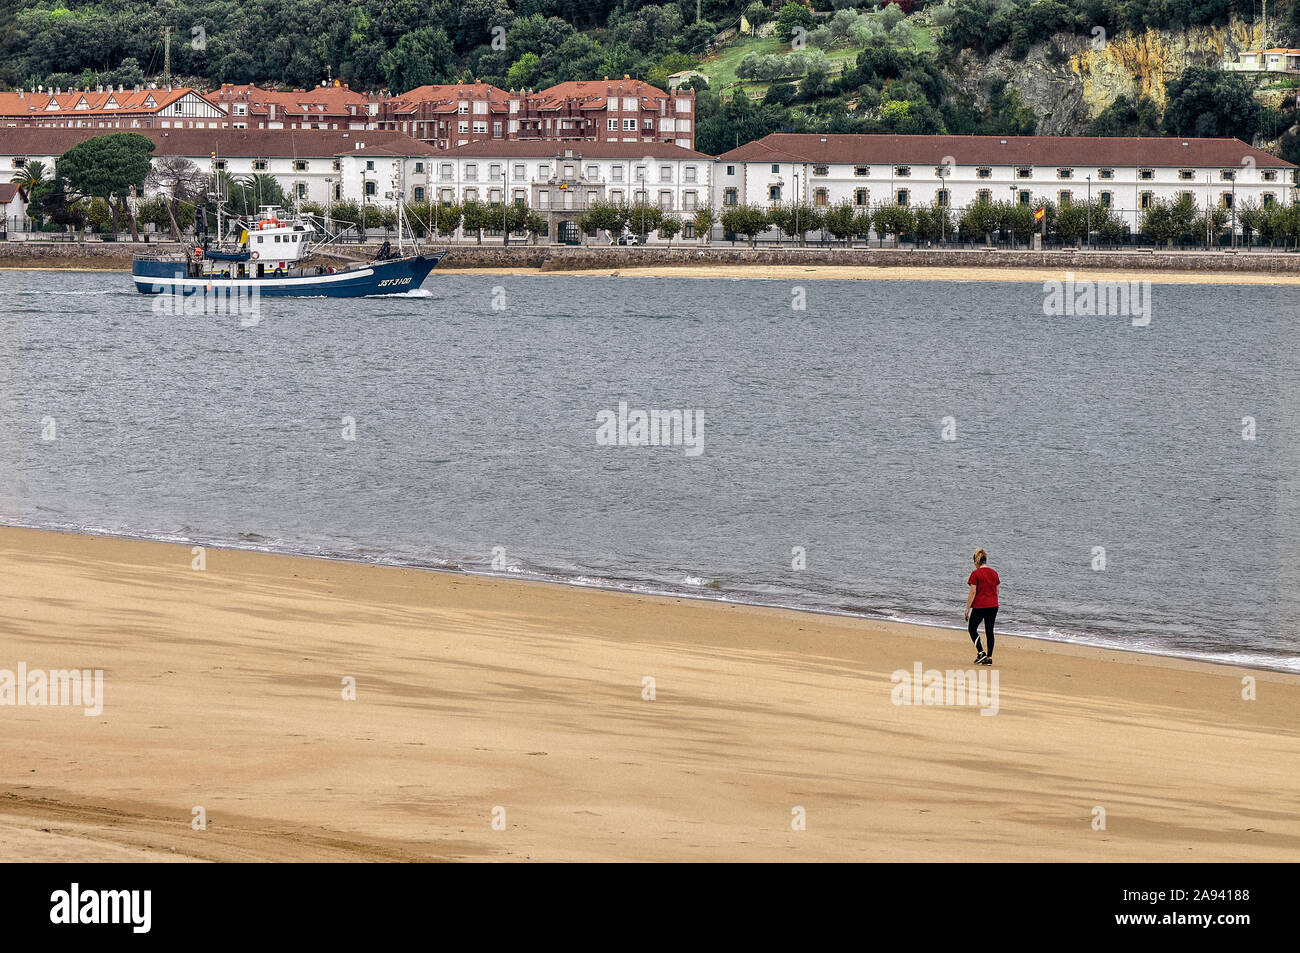 Woman walking along the seashore and a blue boat that goes fishing in the Bay of Biscay along the estuary of the Ason River, Laredo, Cantabria, Spain. Stock Photo